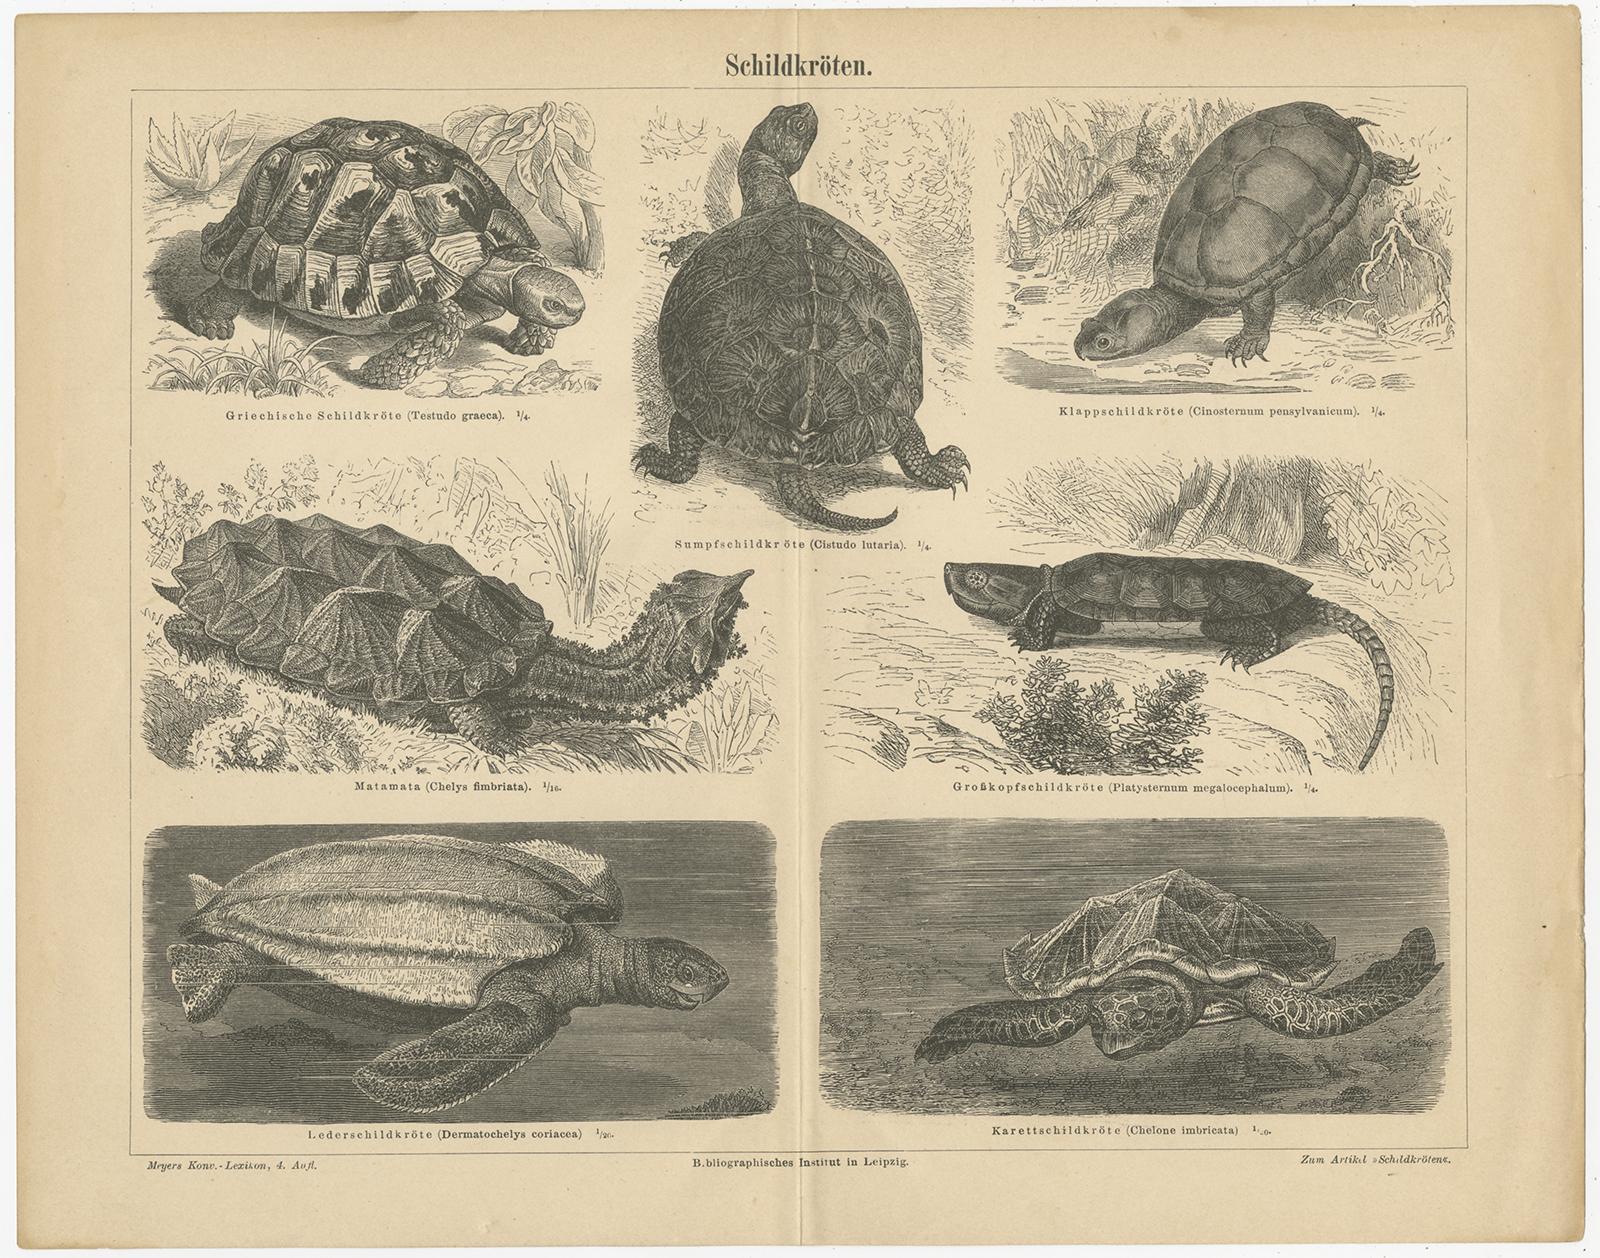 Antique print titled 'Schildkröten'. Original old lithograph of various turtles. This print originates from 'Meyers Konversations-Lexikon'. Published circa 1890. 

Meyers Konversations-Lexikon or Meyers Lexikon was a major encyclopedia in the